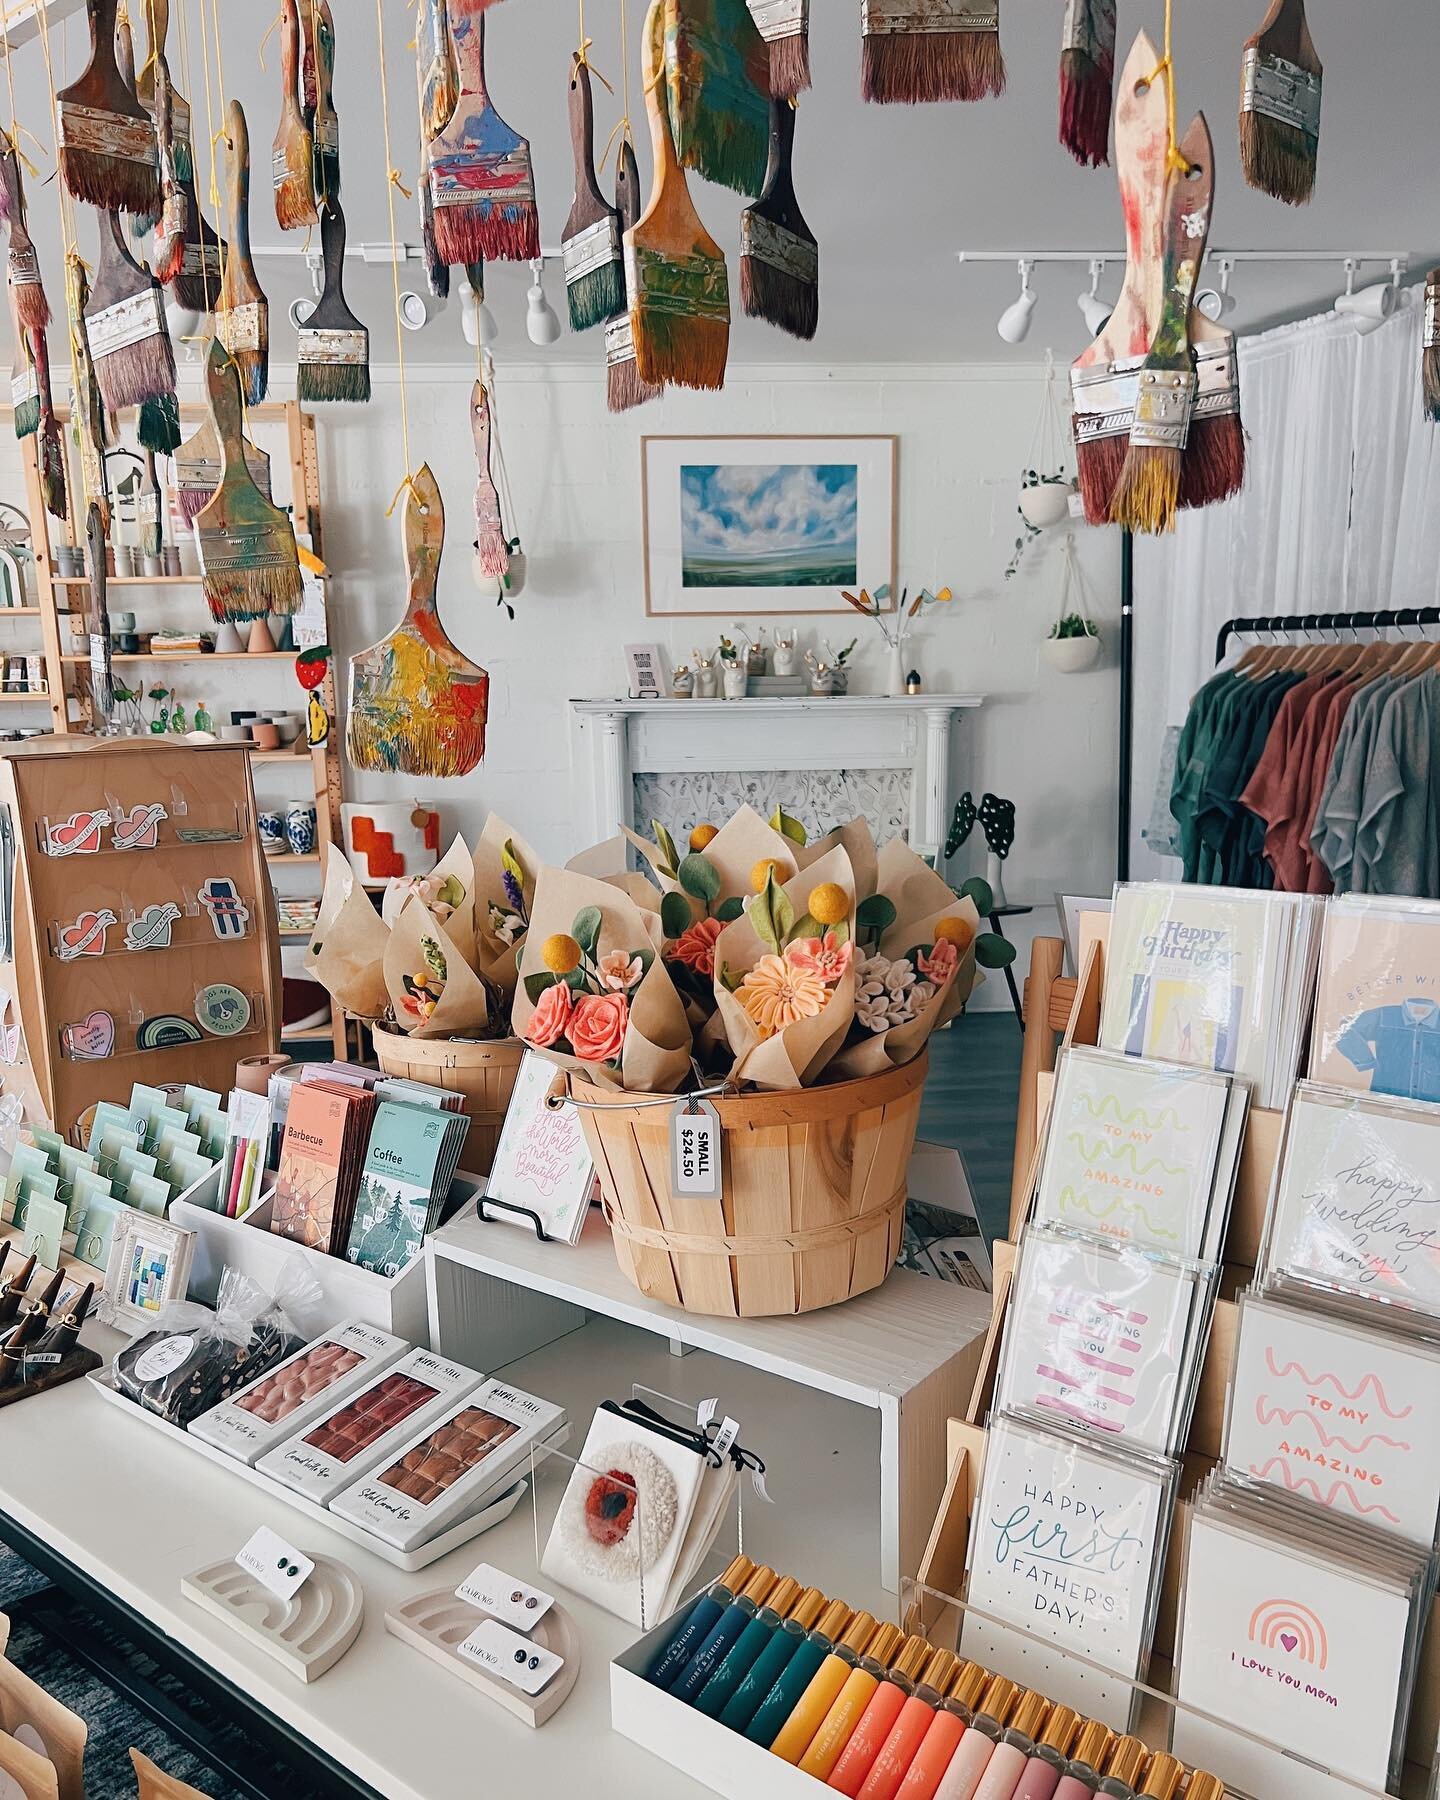 It&rsquo;s a beautiful day to shop handmade! Come see us today from 11am &ndash; 5pm.

🌷The Spring Pop Up Shop is open weekends in May, Friday - Sunday, 11am - 5pm
📍2909 Old Buncombe Rd, Greenville SC 29609
🔗Visit the link in profile for the list 